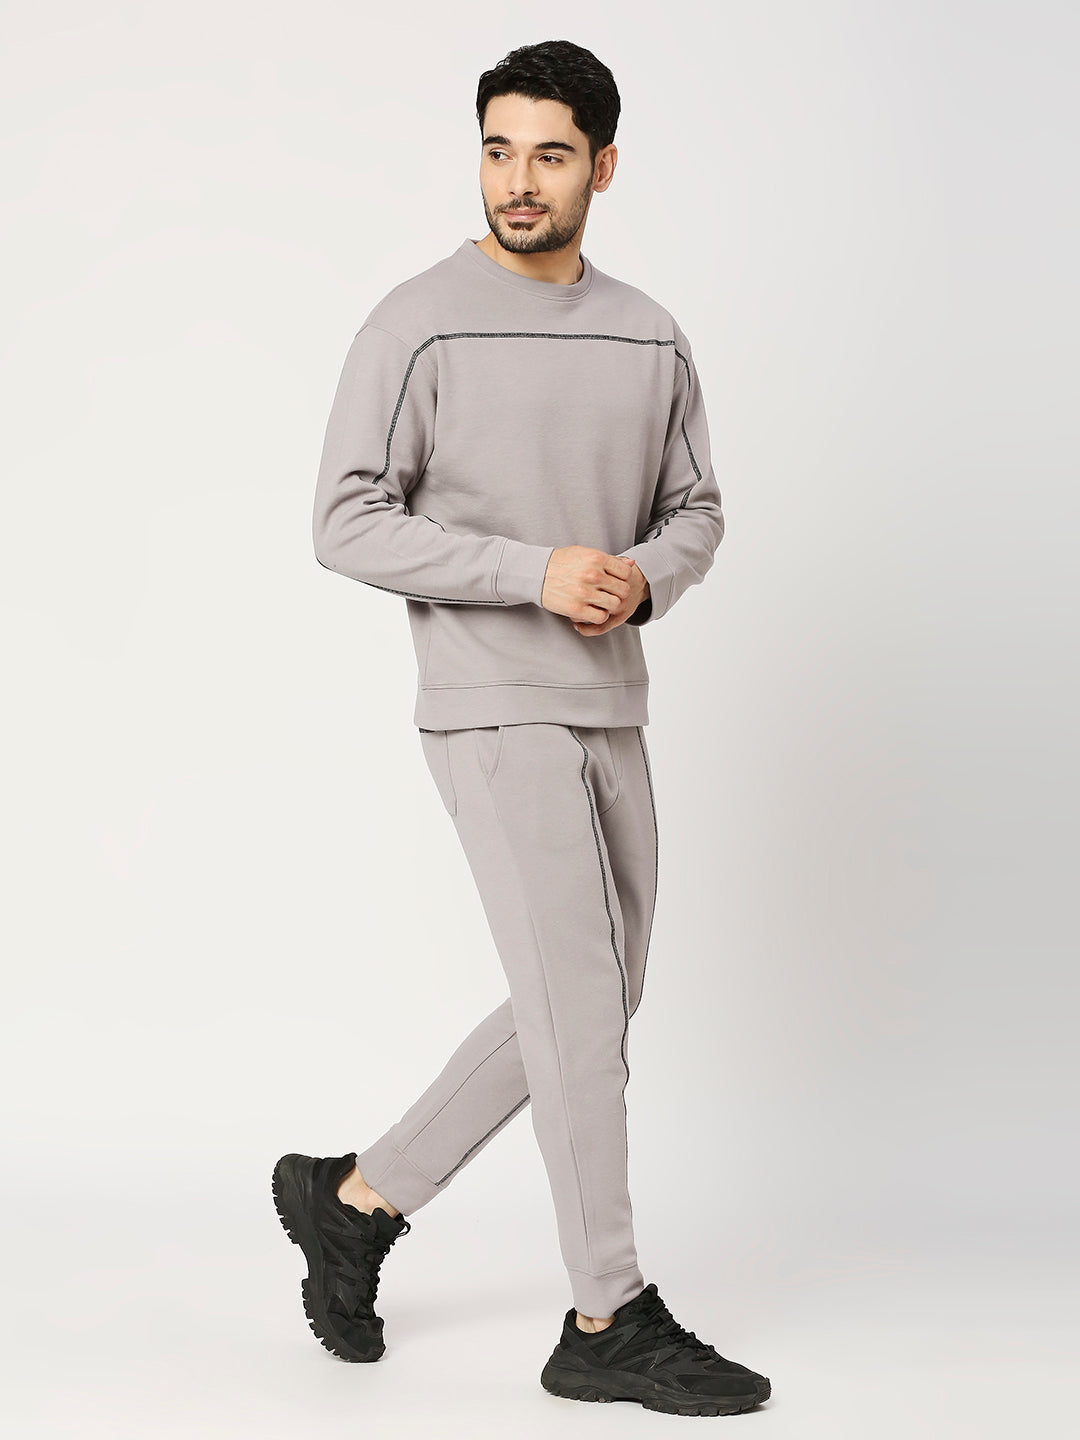 Buy Blamblack Men's Solid Full sleeves Sweat with Pants Co-Ord Set with Contrast Stitch detail.